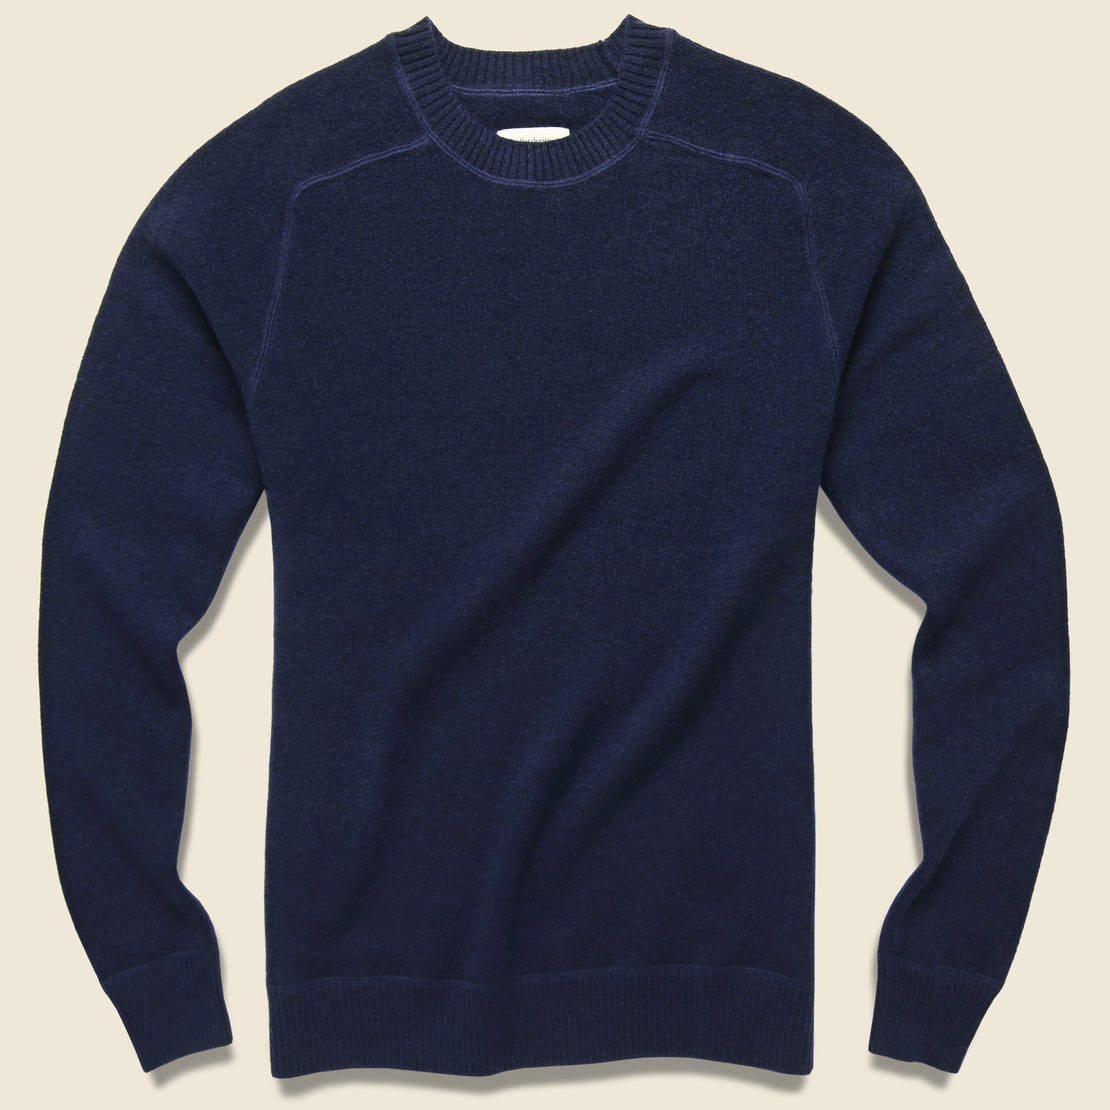 Life After Denim Columbia Cashmere Sweater - Blue Blood